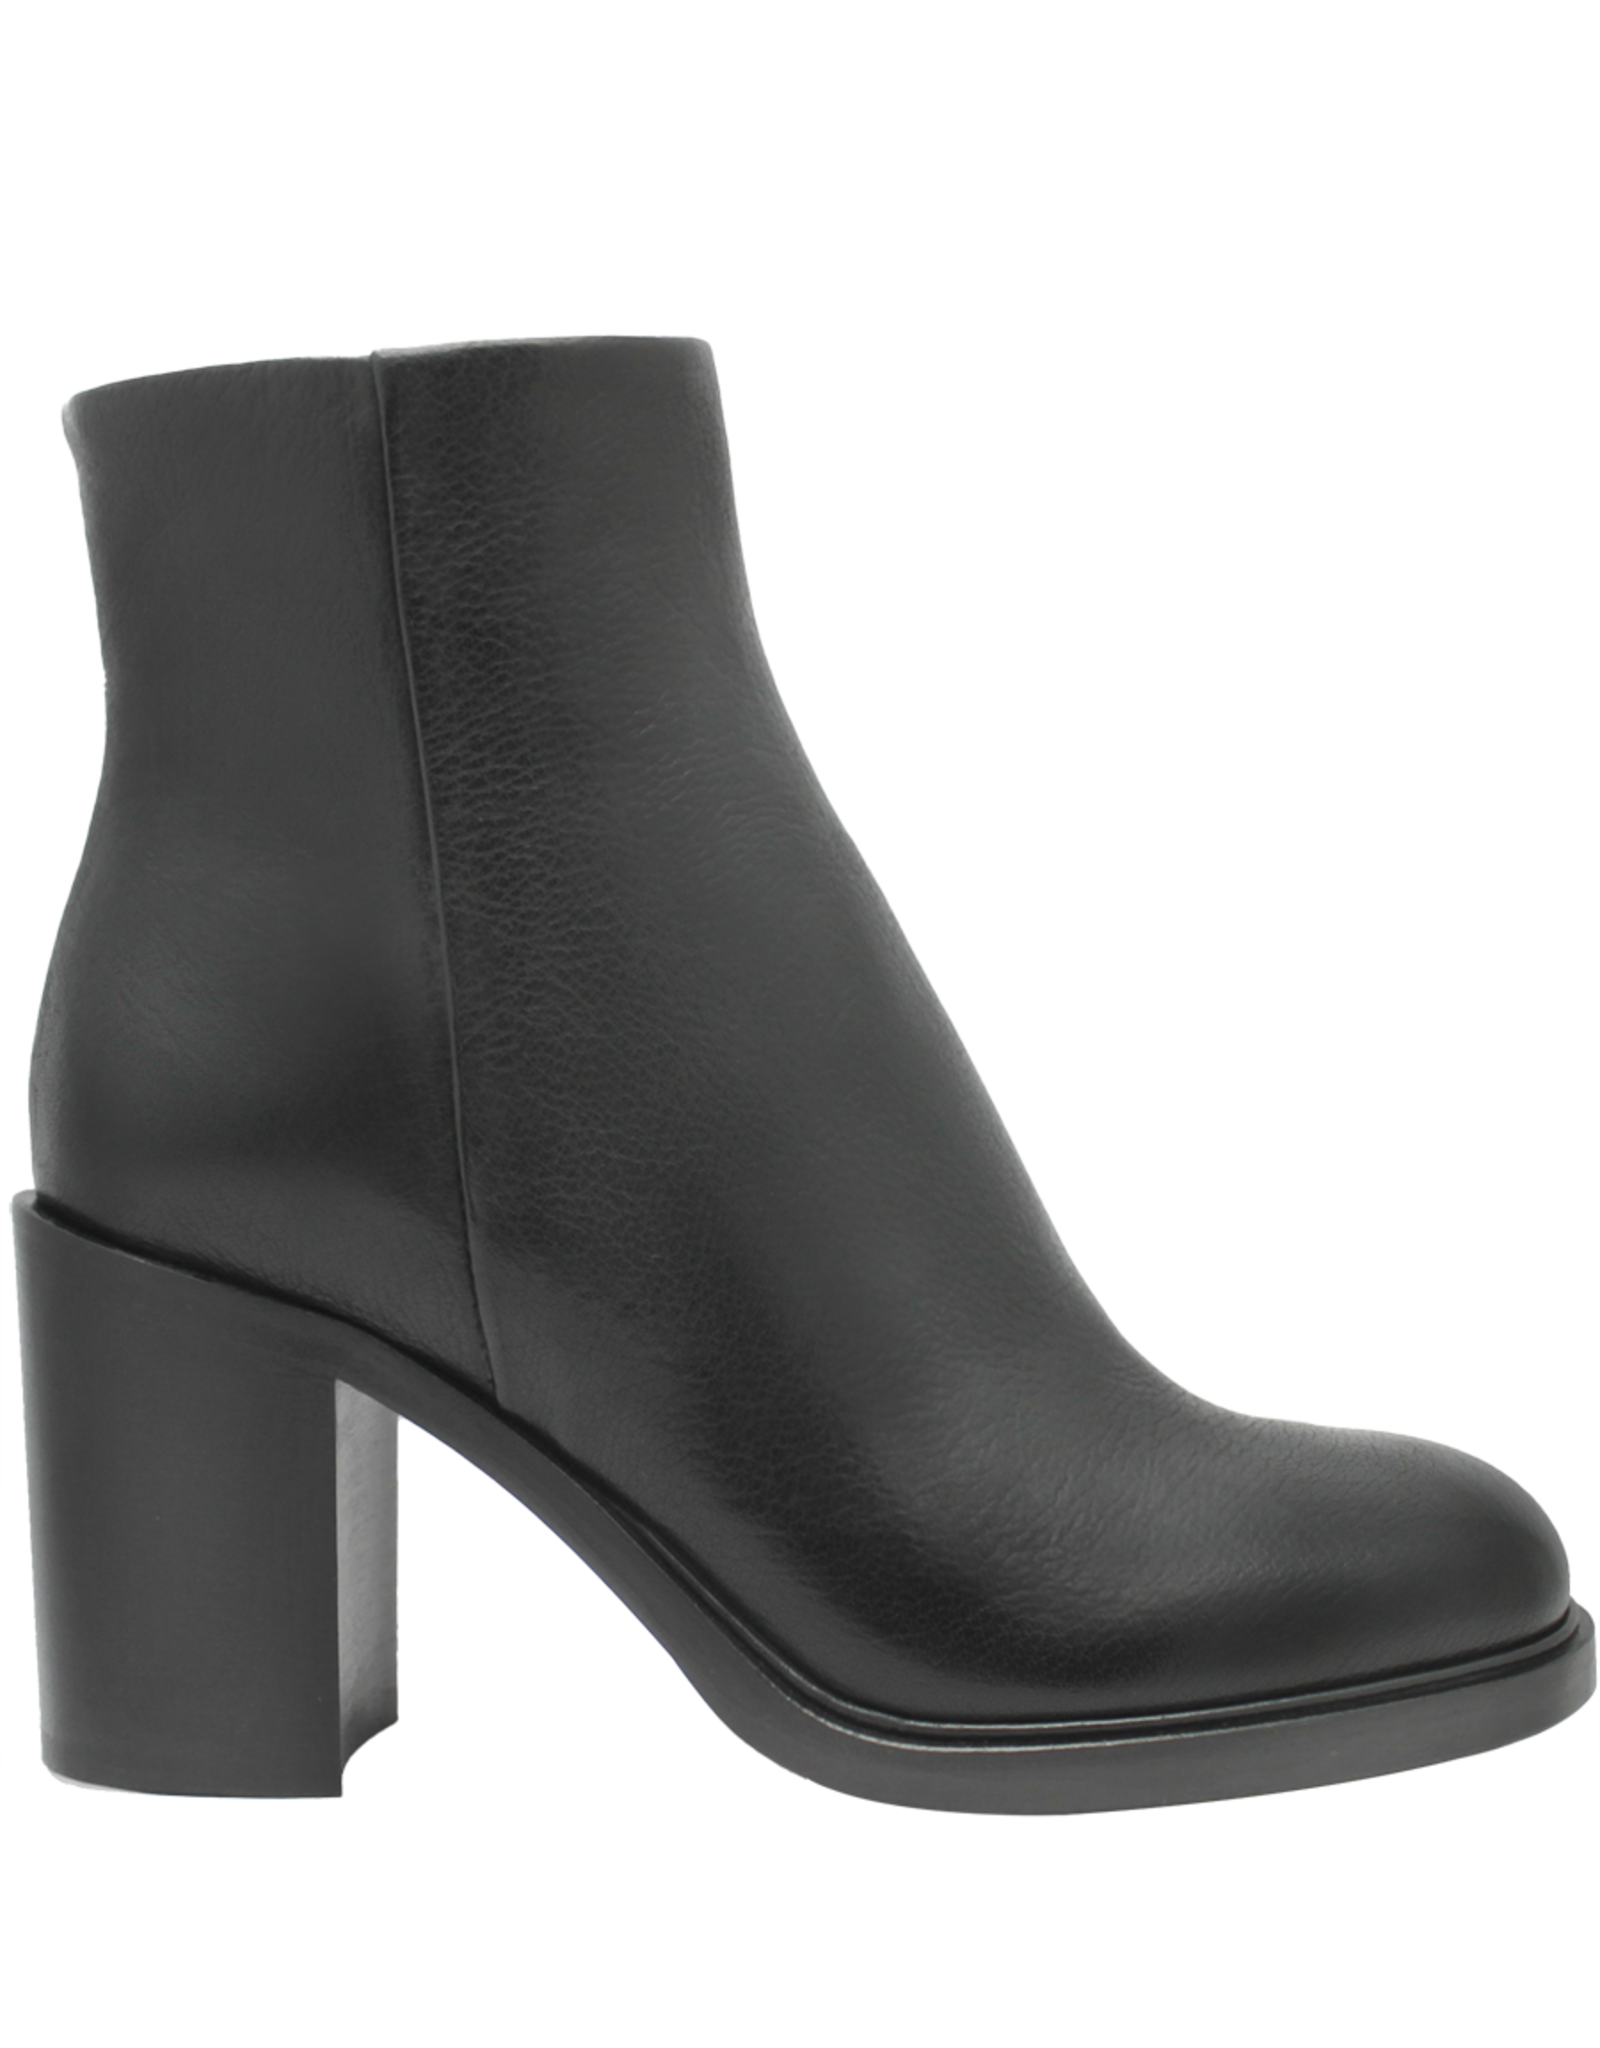 Now Now N42X Black Round Toe Ankle Boot w/Strap 8440